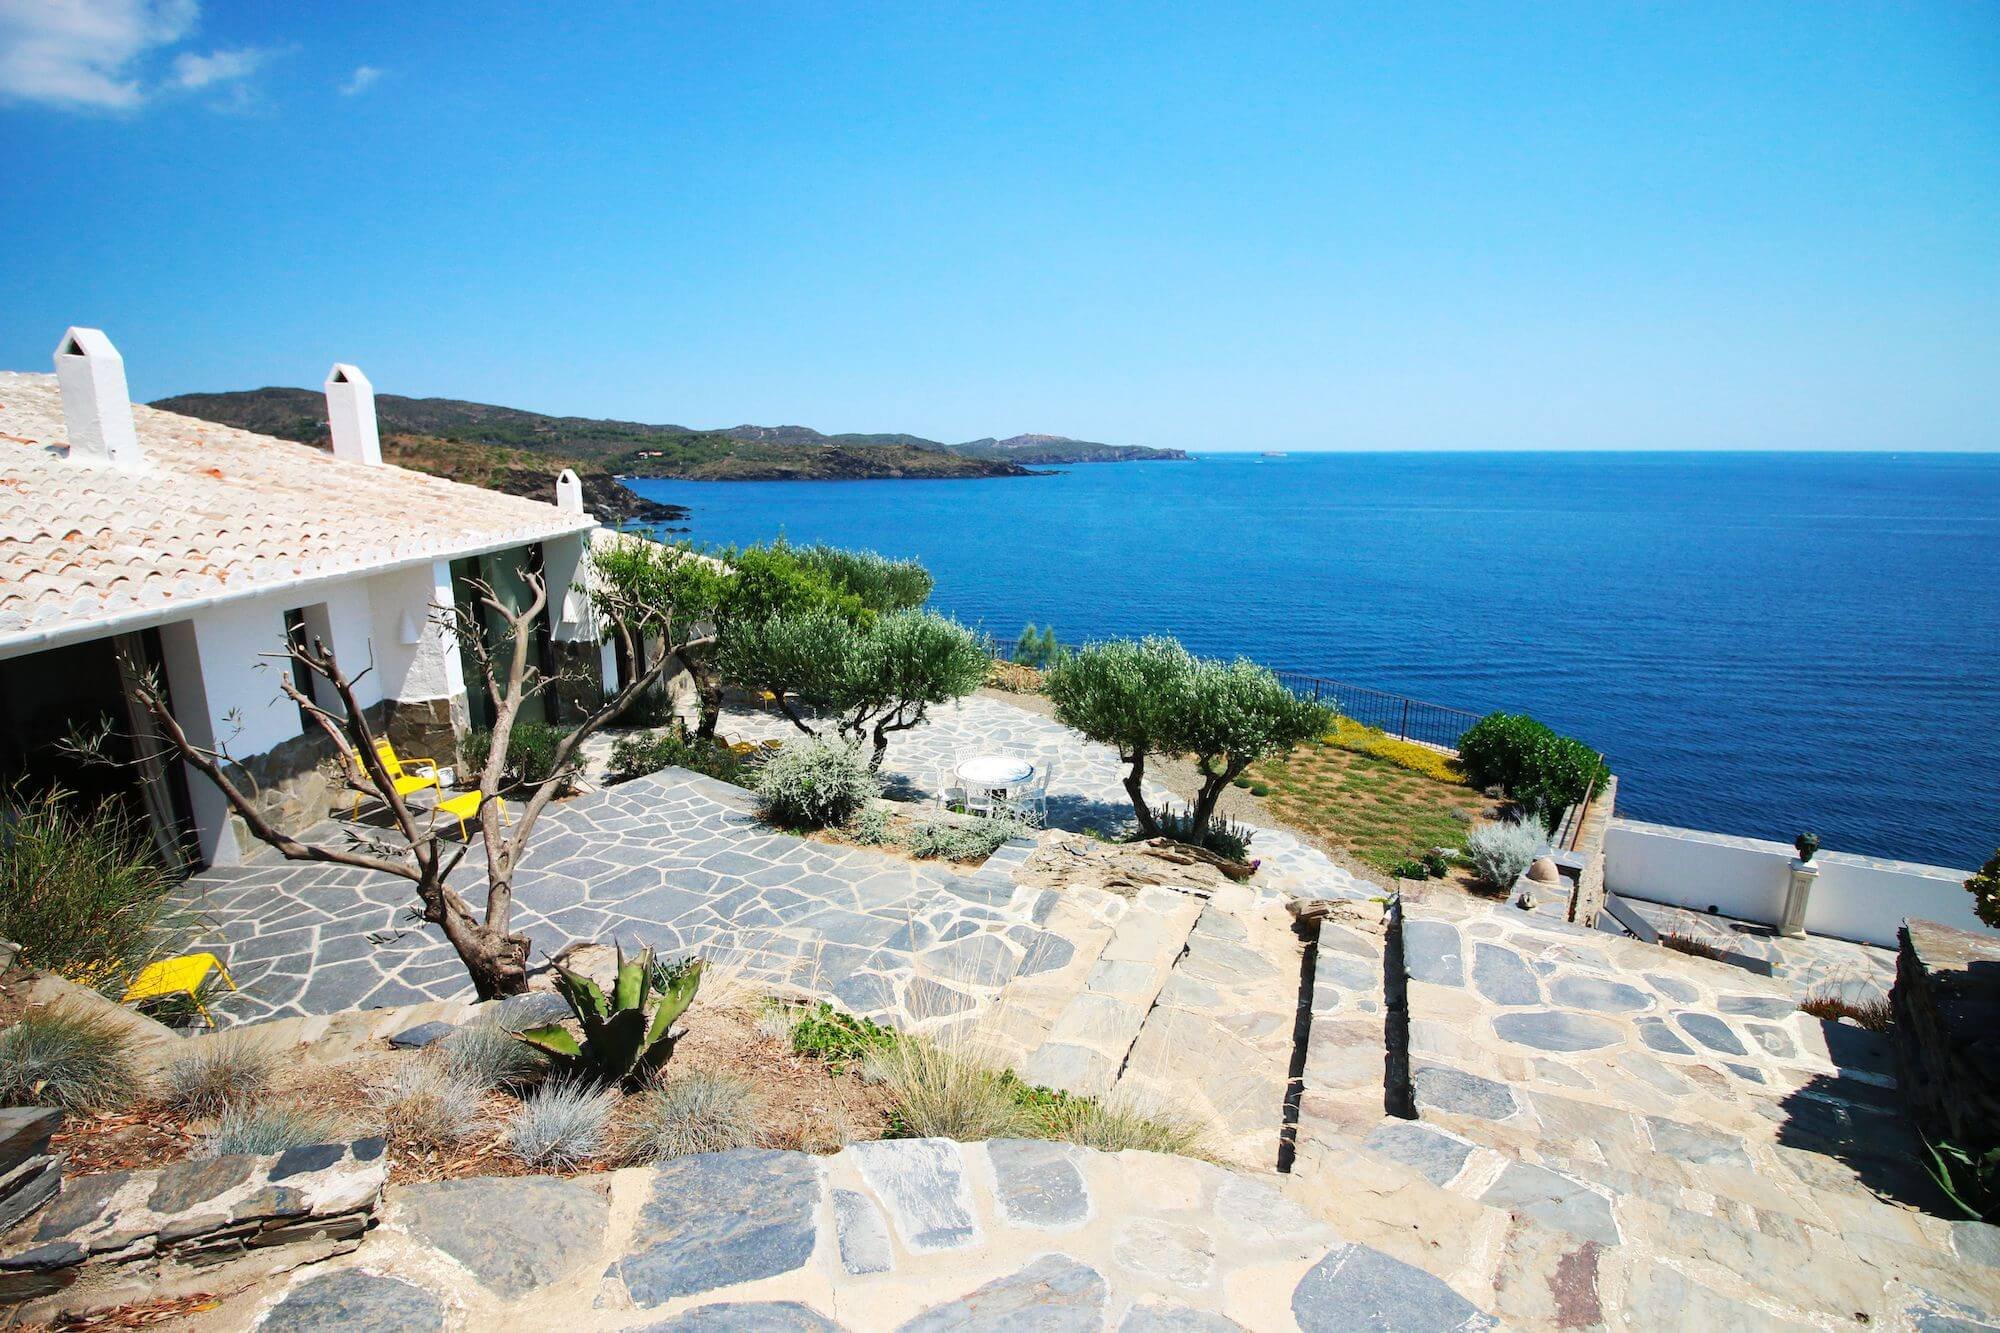 Prestigious villa by the sea for a seminar in Cadaqués, Spain, combining work sessions and teambuilding.